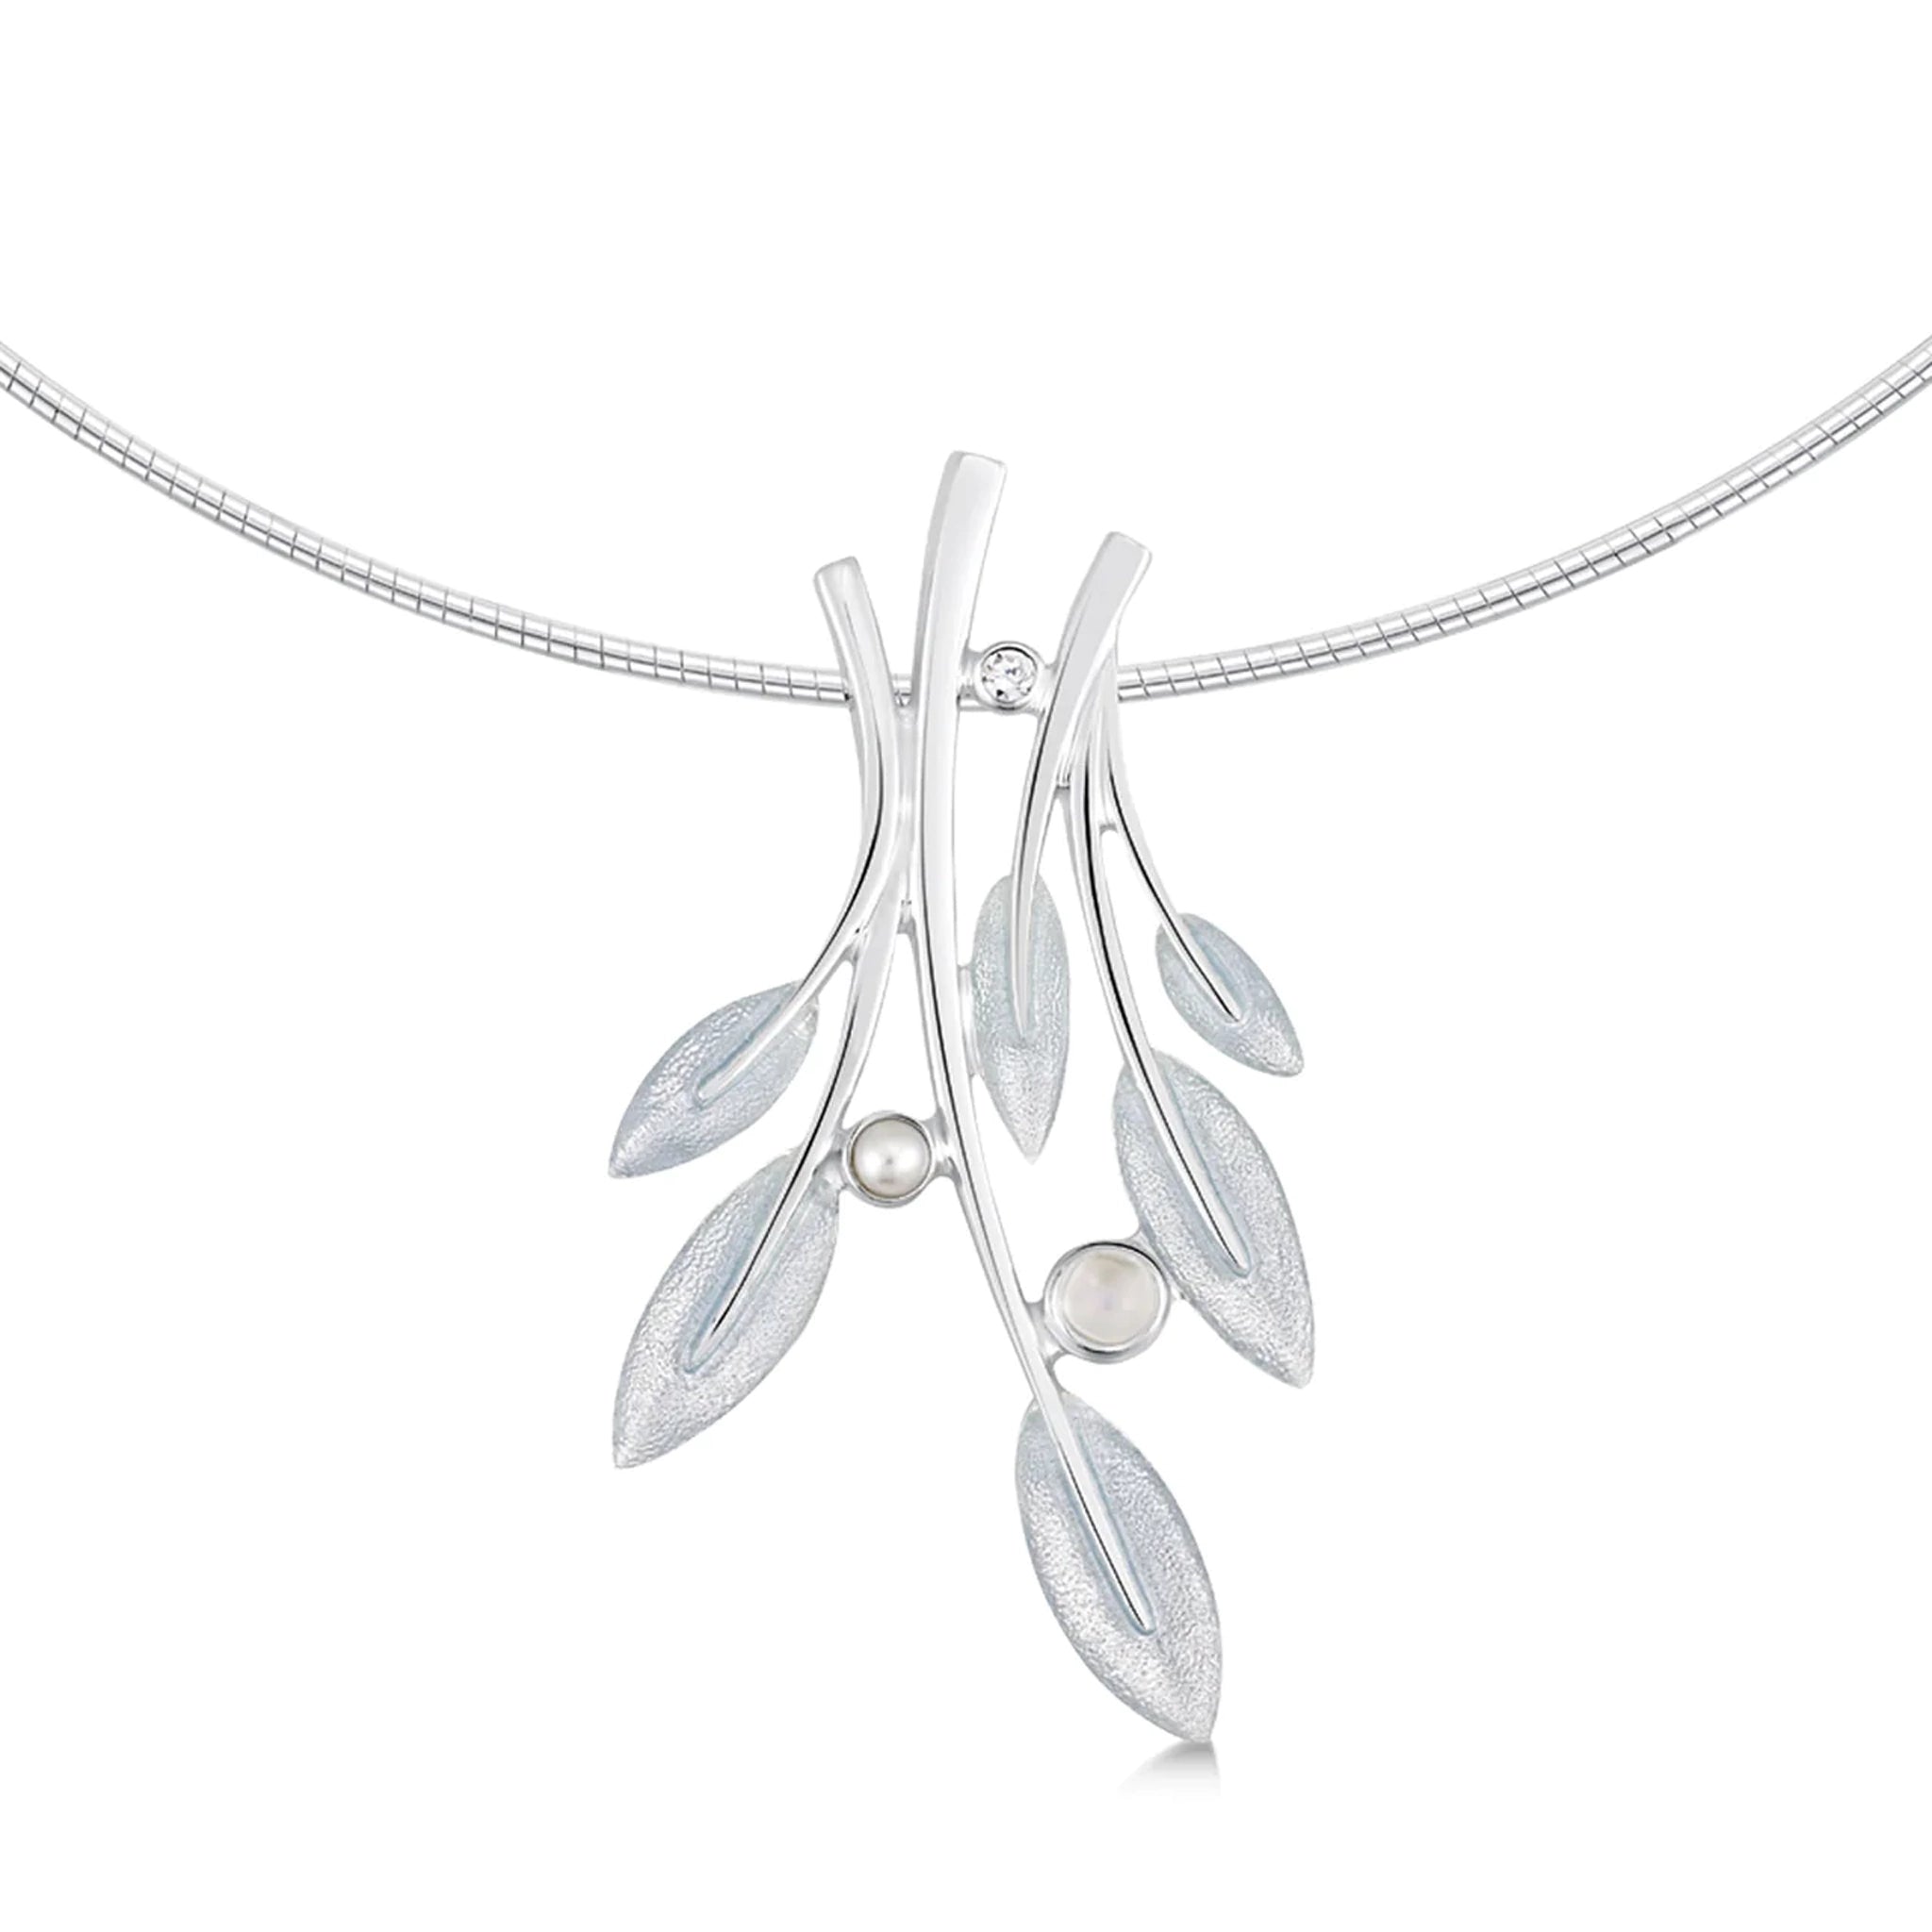 Large silver necklet with a rowan tree leaf design, a pearl and moonstone in frosty white enamel on a silver neck wire